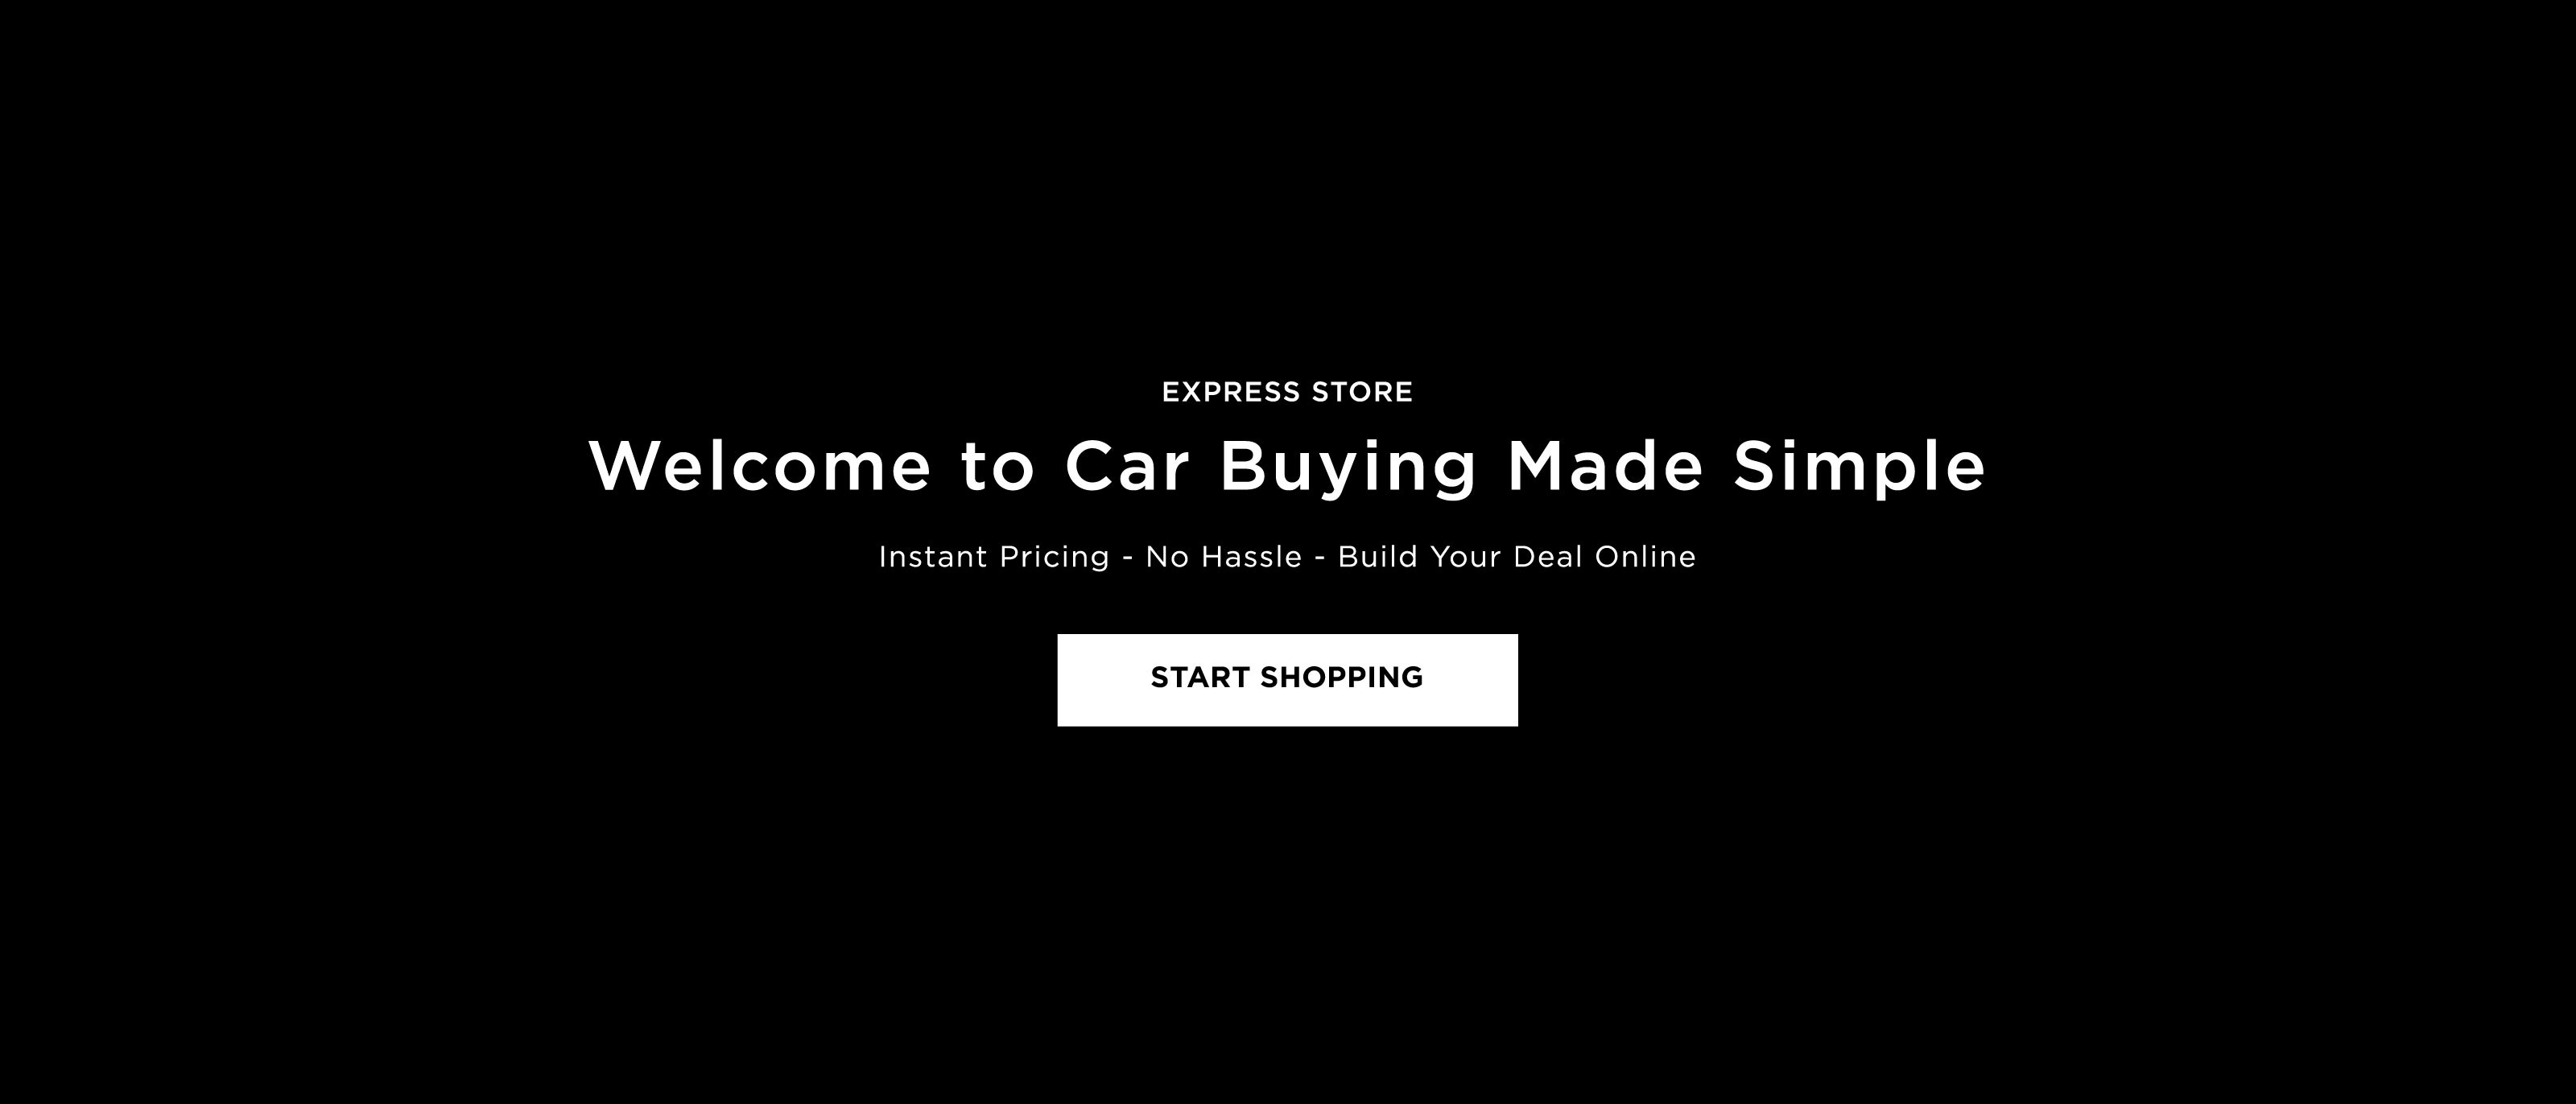 Car Buying Made Simple. Express Store